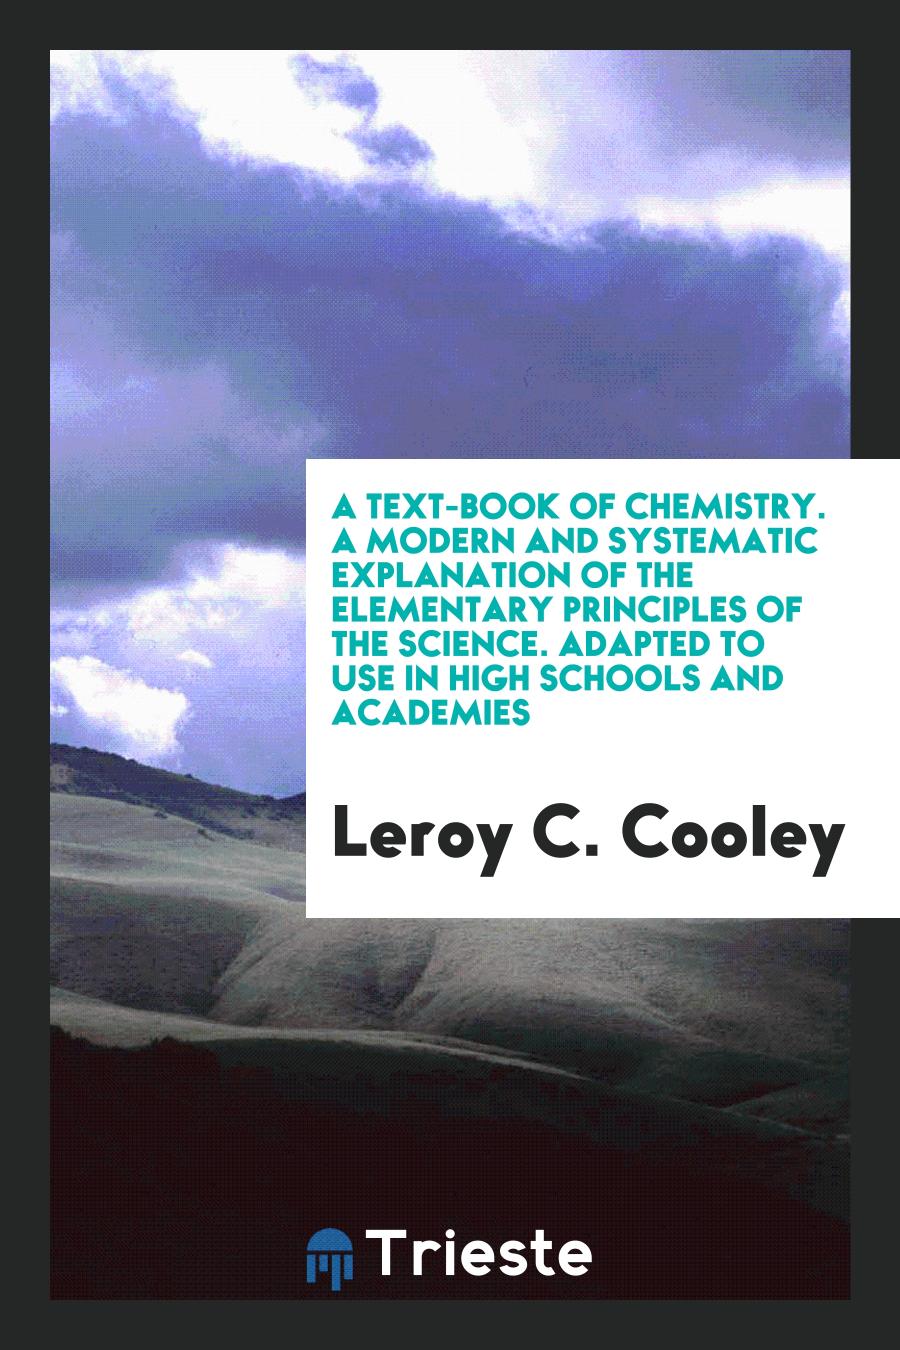 A Text-Book of Chemistry. A Modern and Systematic Explanation of the Elementary Principles of the Science. Adapted to Use in High Schools and Academies